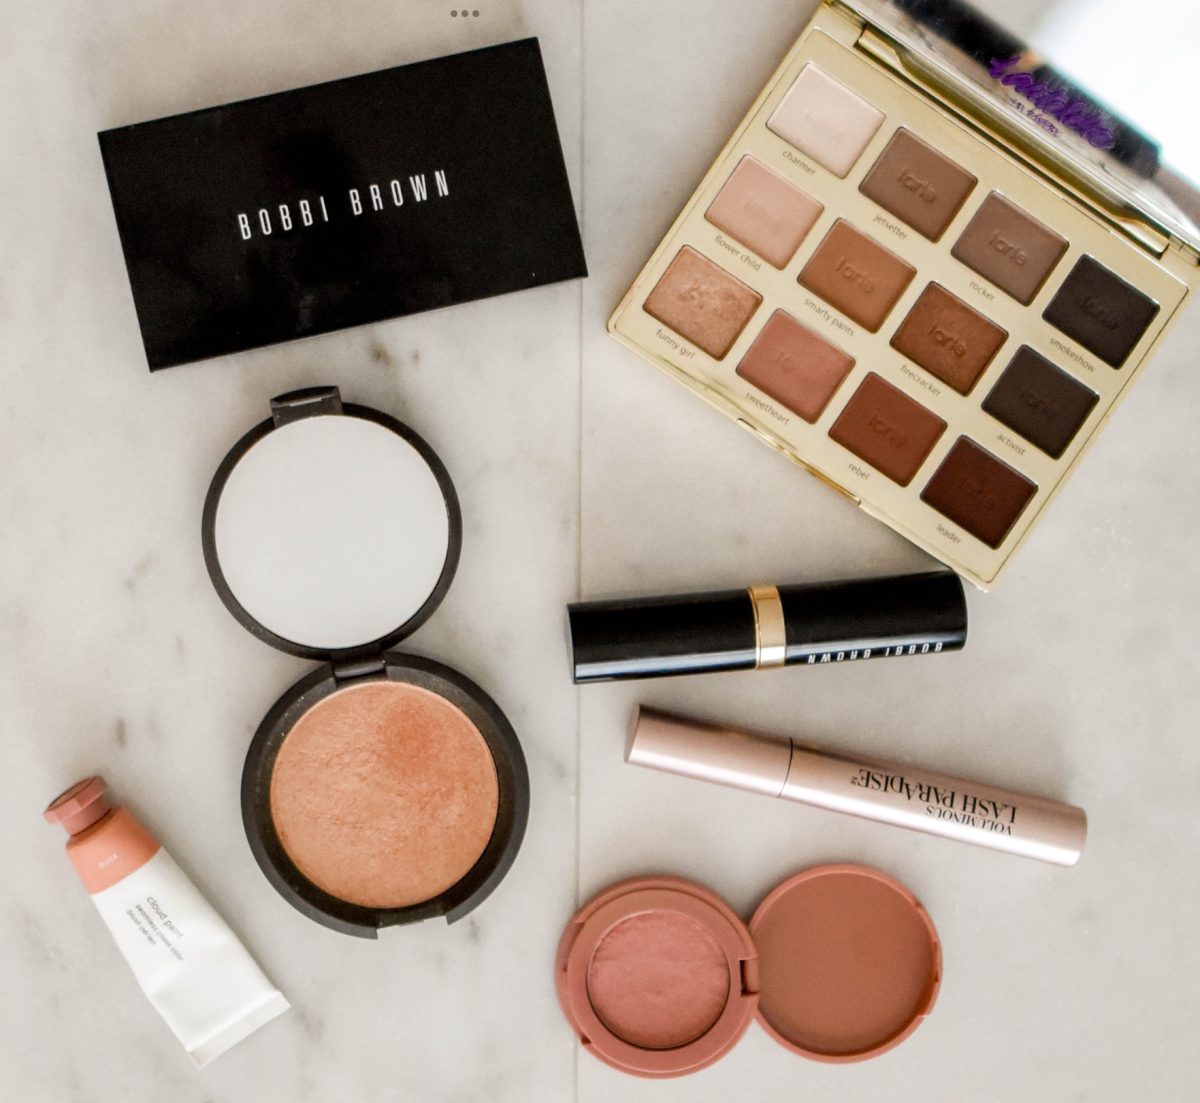 Make-up+by+Millie+Bobbi+Brown+is+displayed+on+a+counter.